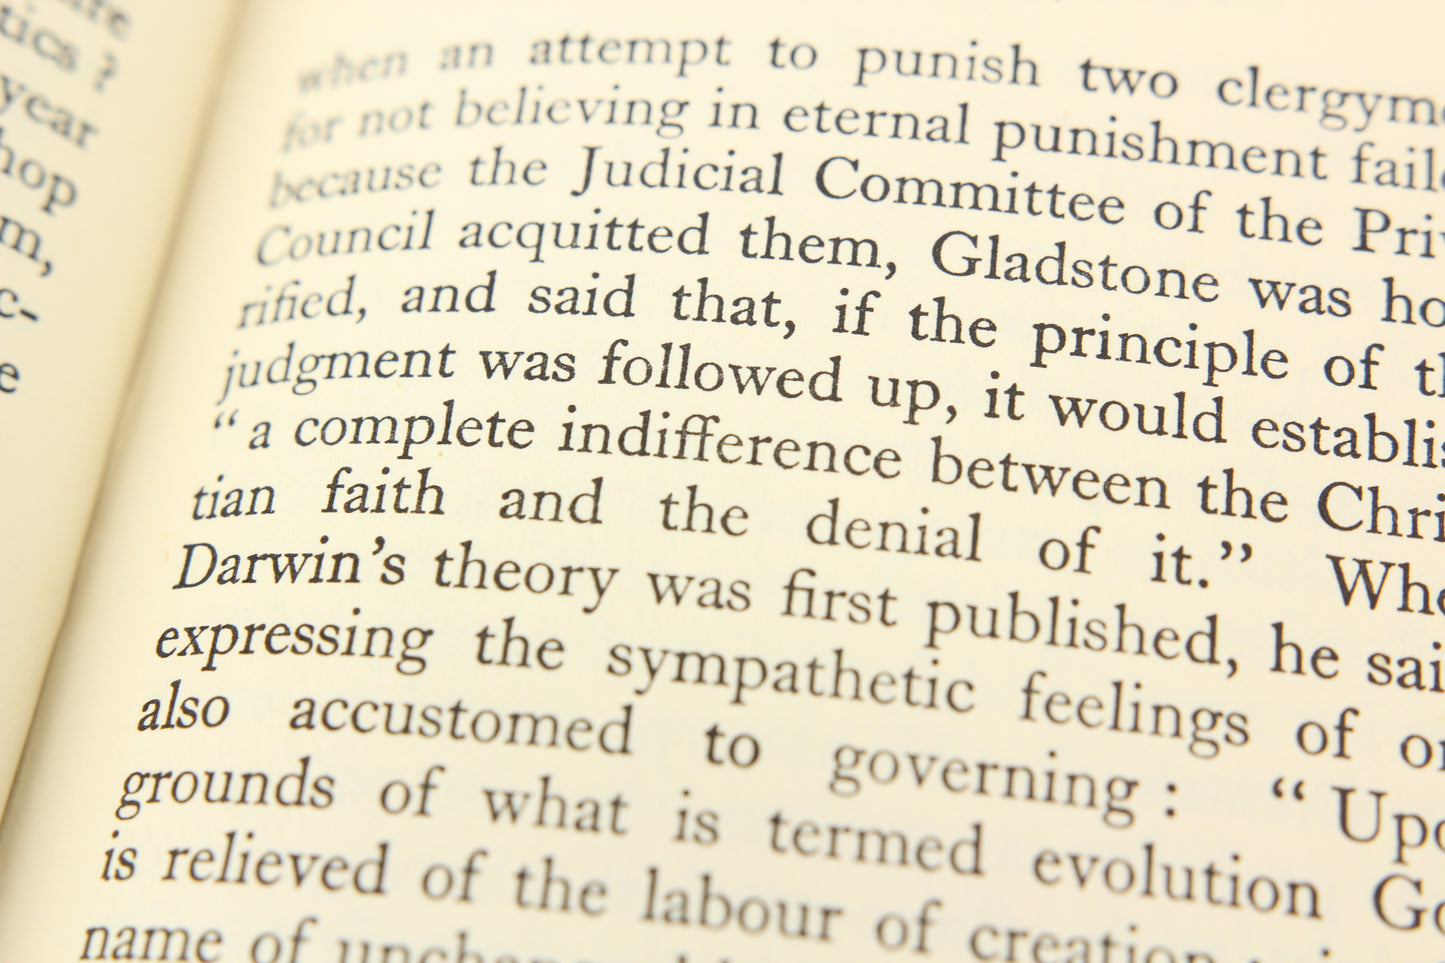 Religion and Science by Bertrand Russell, 1956 Printing